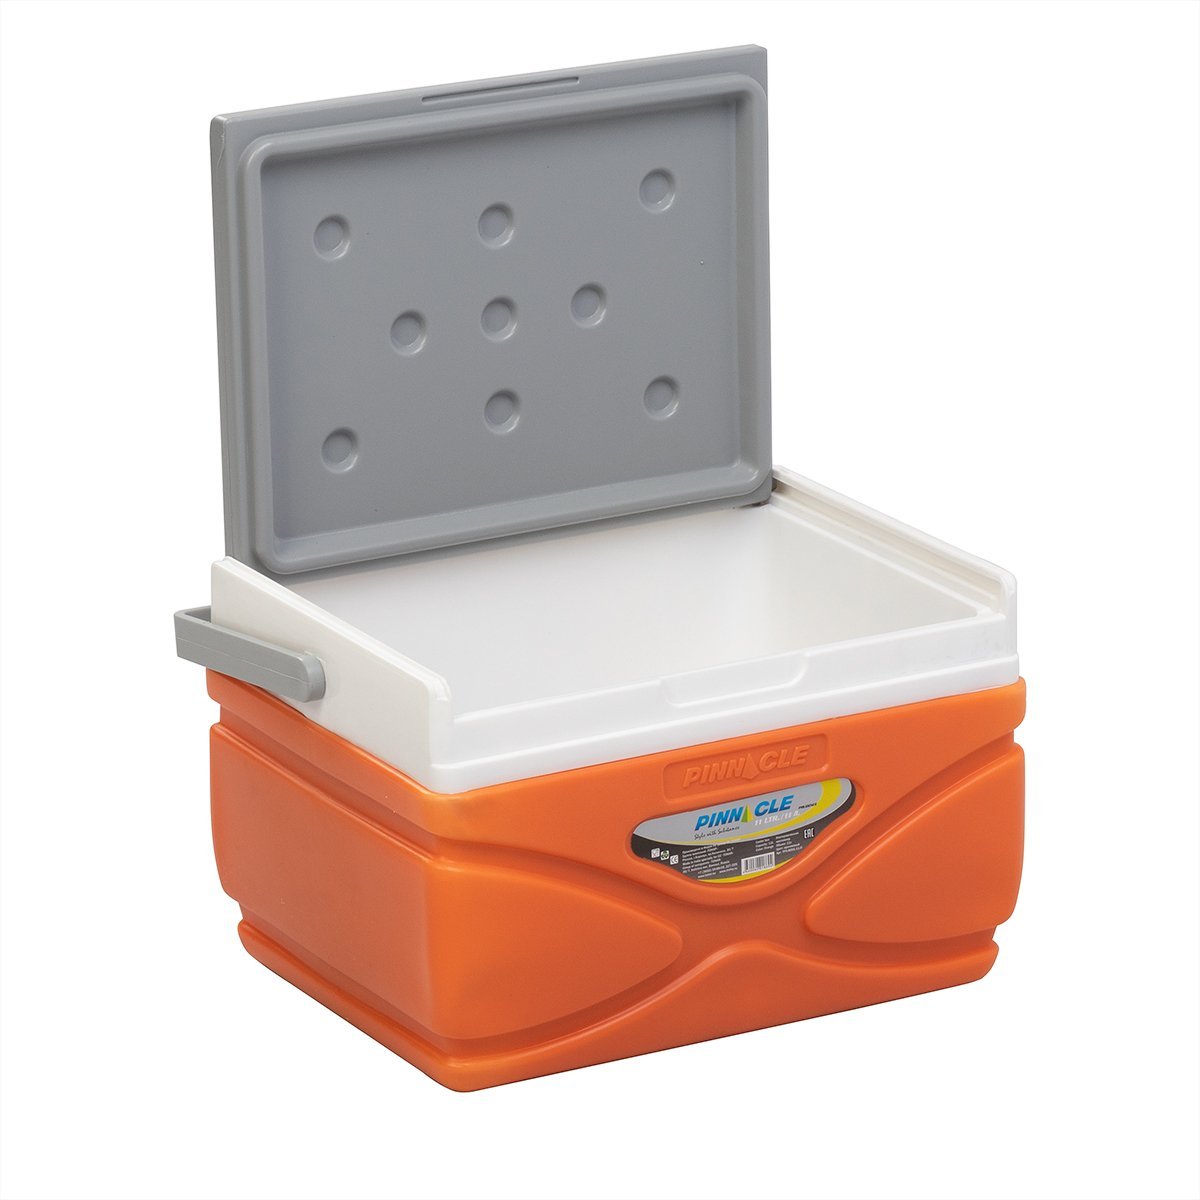 Prudence Portable Hard-Sided Ice Chest for Camping, 11 qt, with handle, orange color with a lid widely open